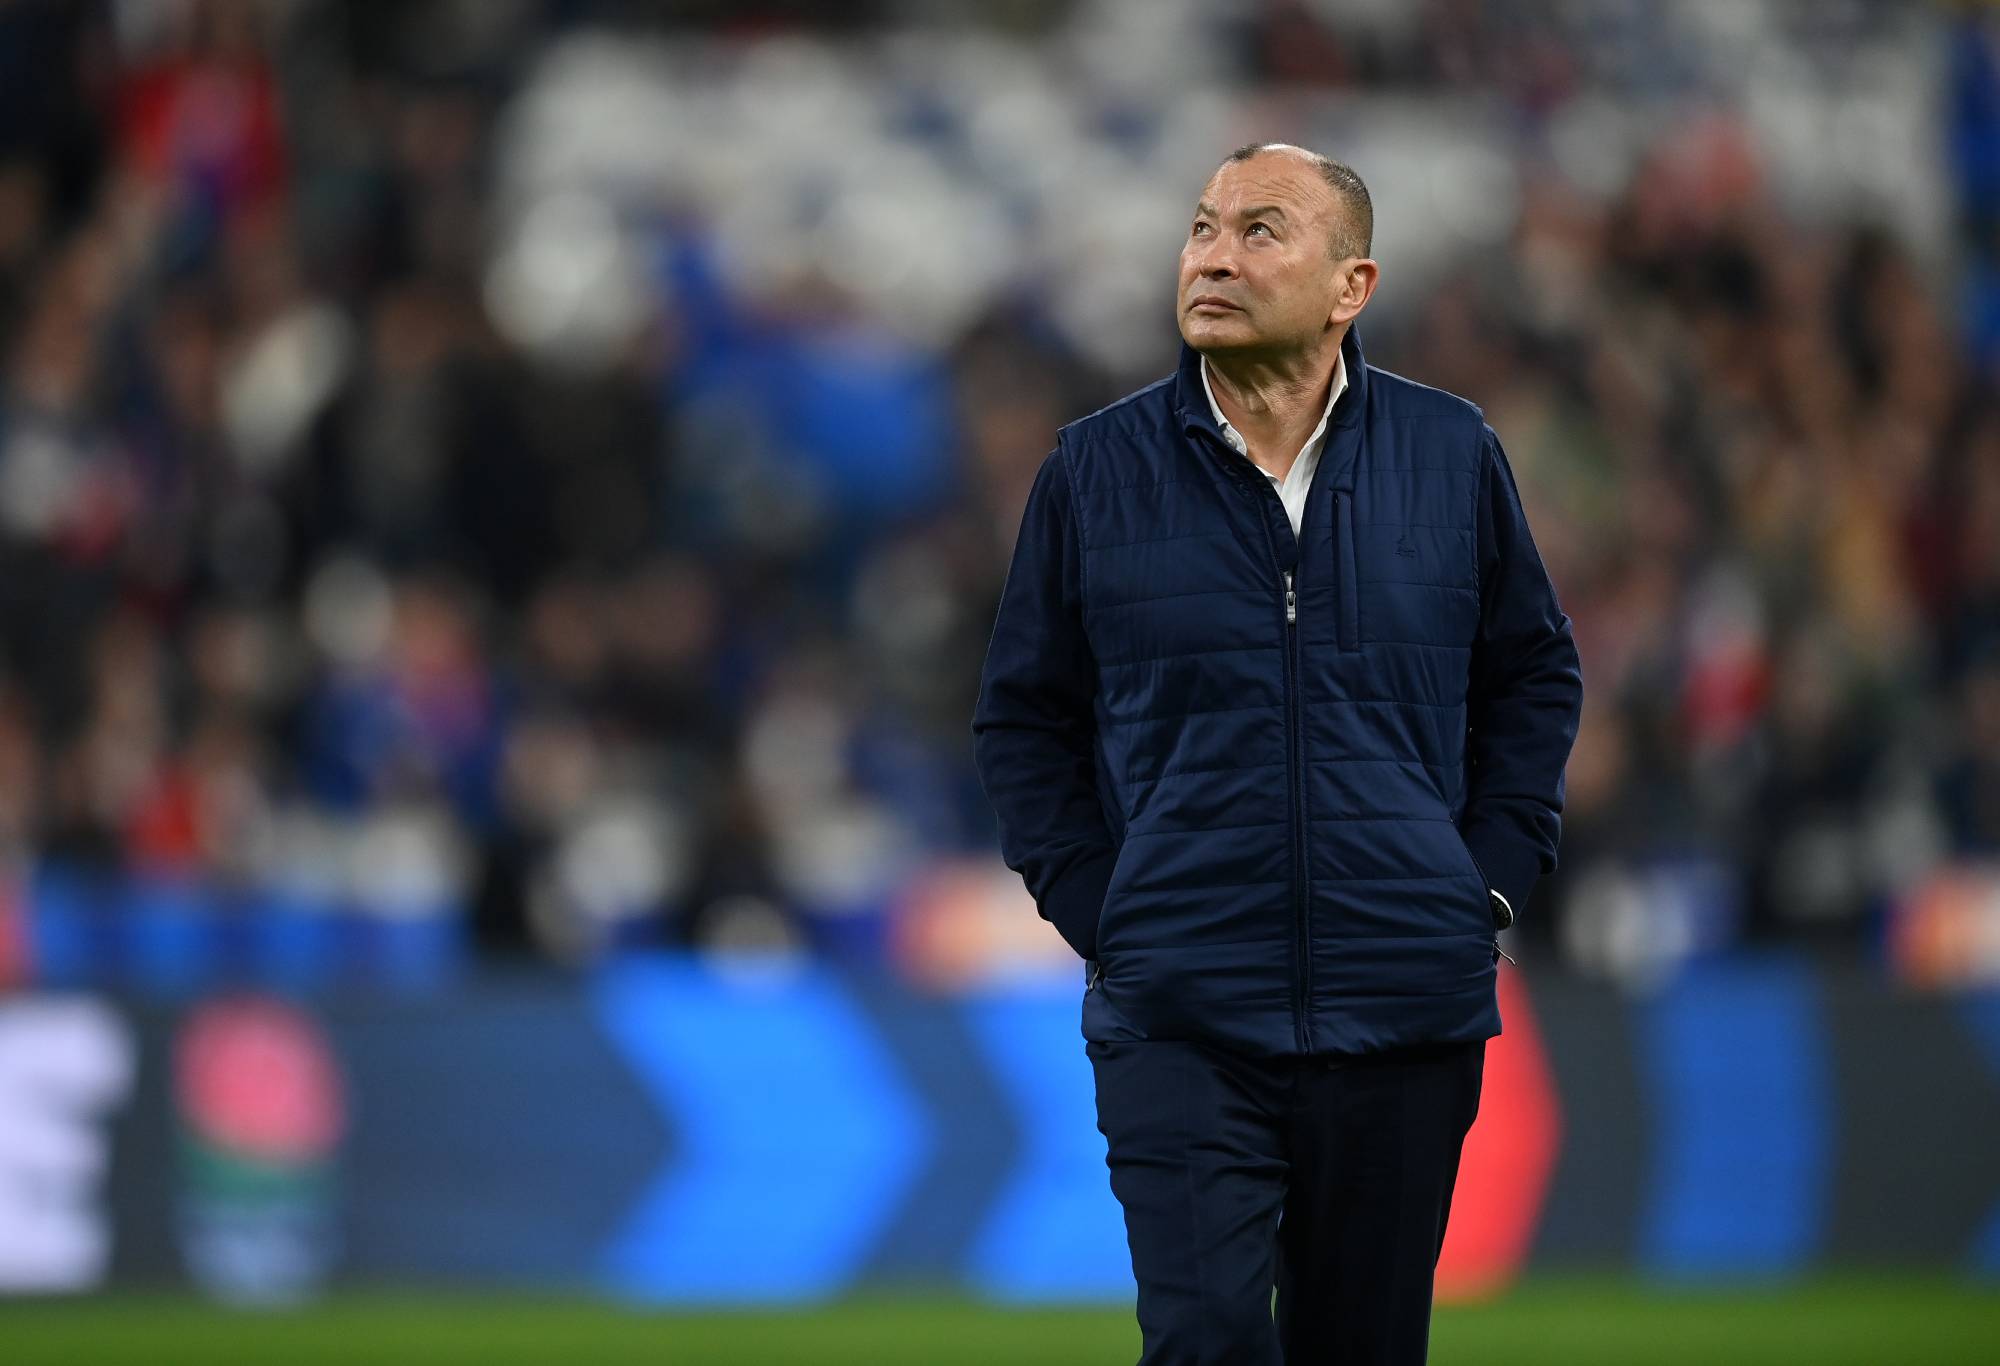 Eddie Jones, Head Coach of England looks on prior to the Guinness Six Nations Rugby match between France and England at Stade de France on March 19, 2022 in Paris, France. (Photo by Dan Mullan - RFU/The RFU Collection via Getty Images)